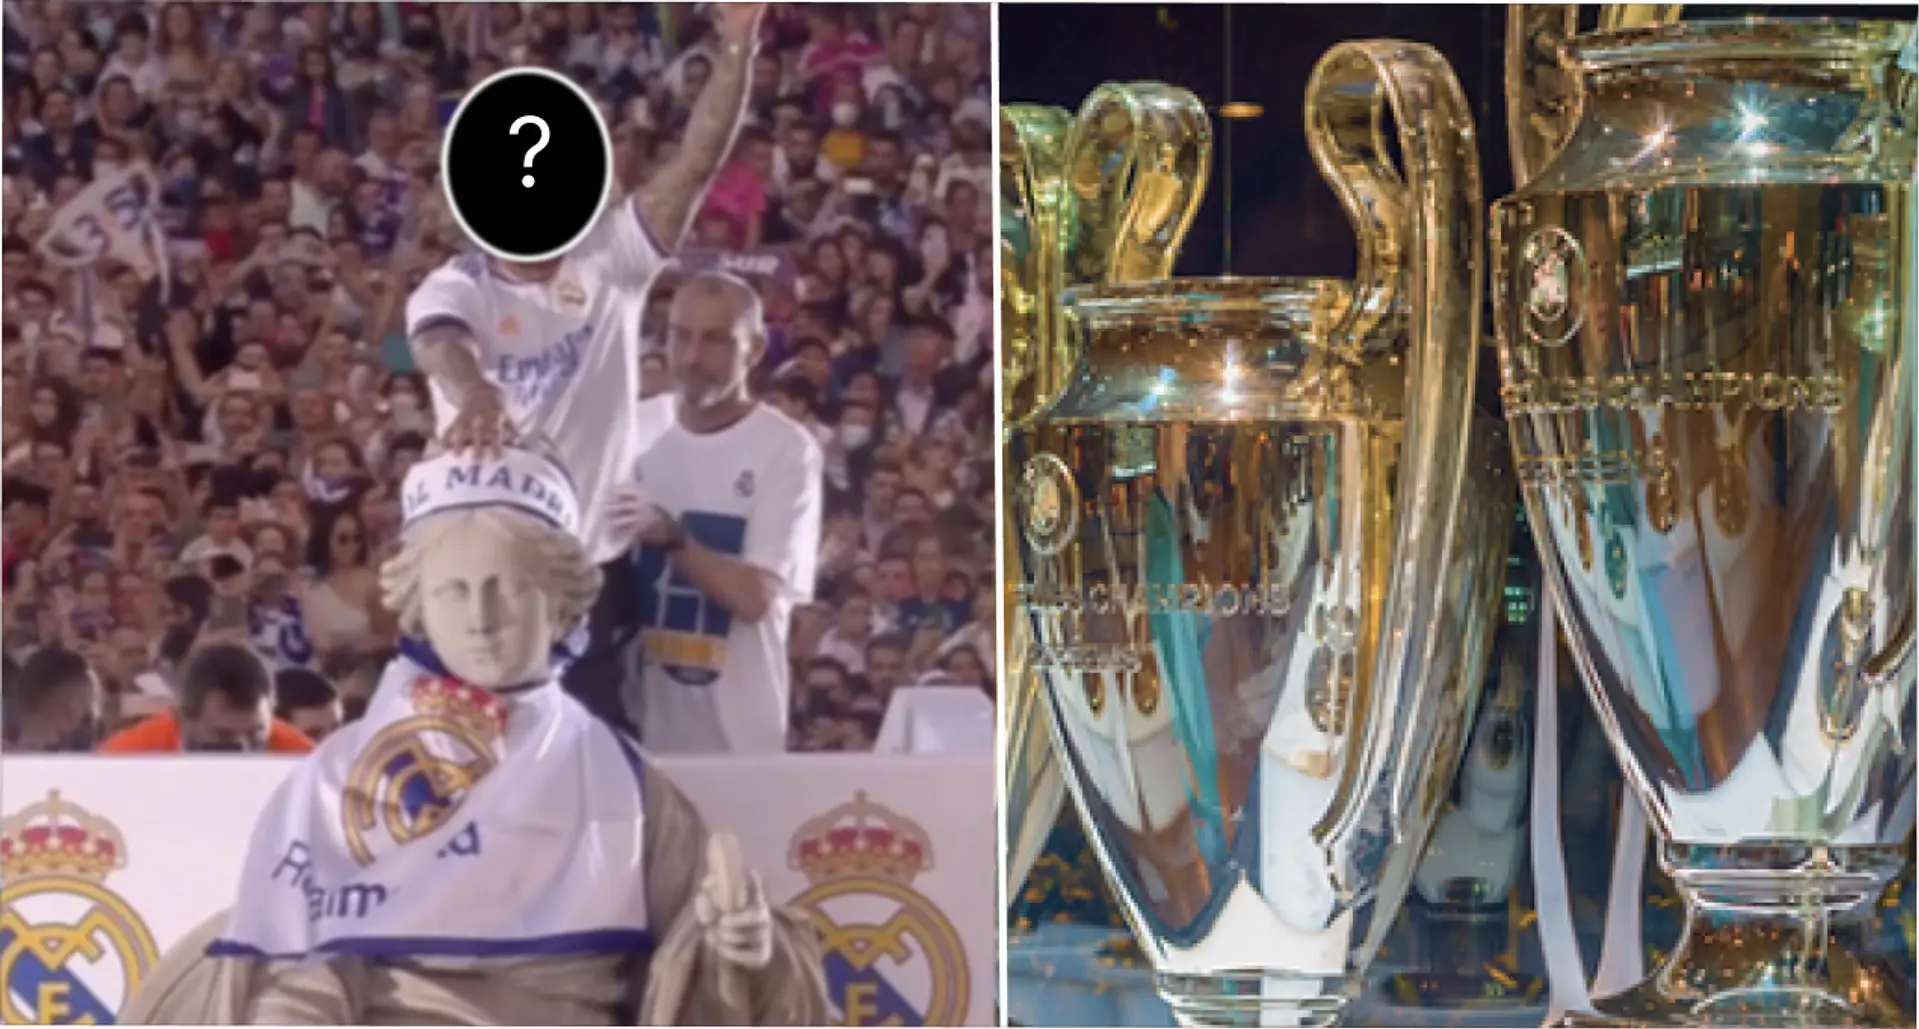 Who is the Real Madrid's most decorated player?